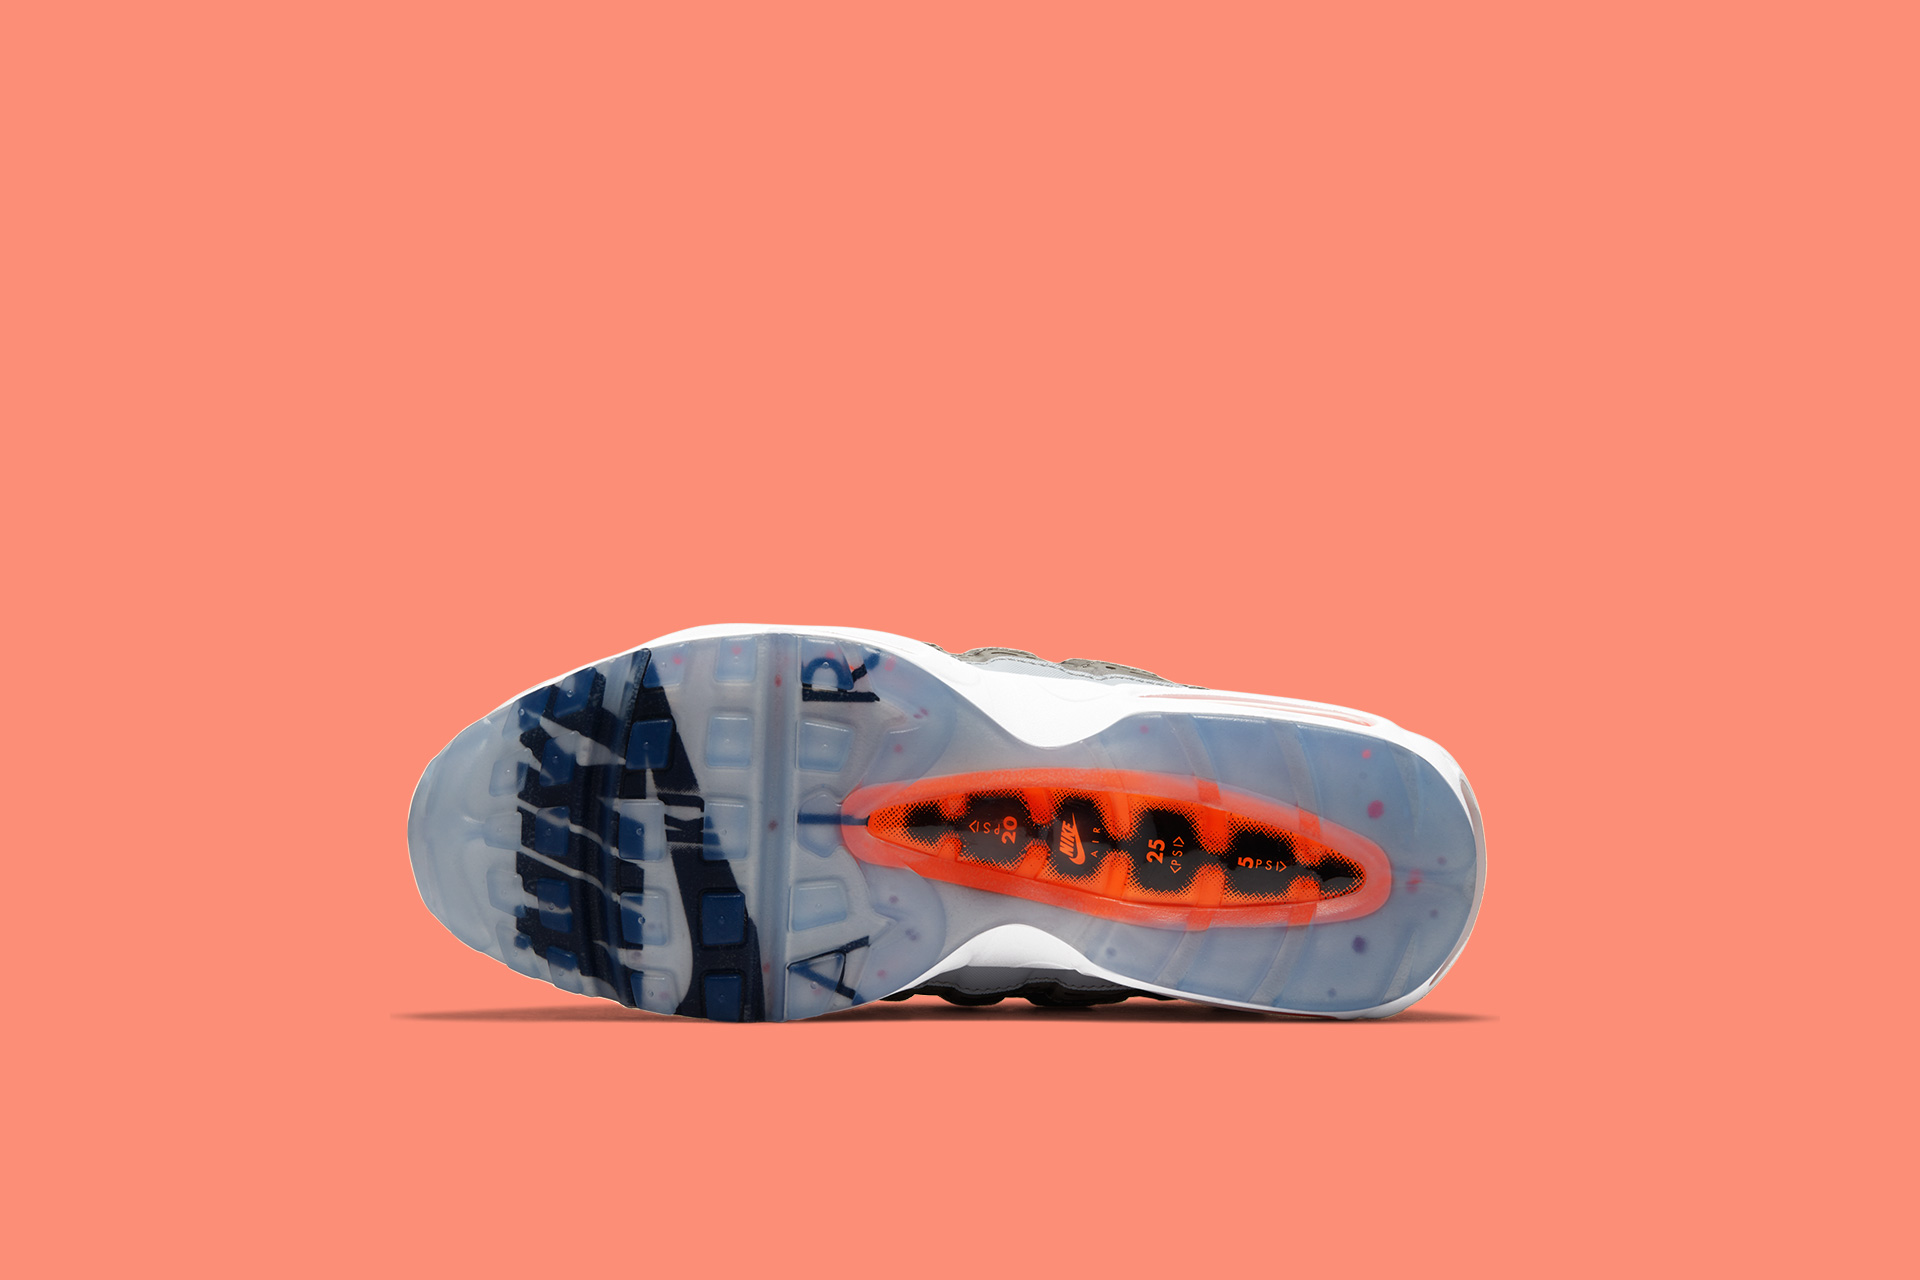 Release Details: The Kim Jones x Nike Air Max 95 Collection